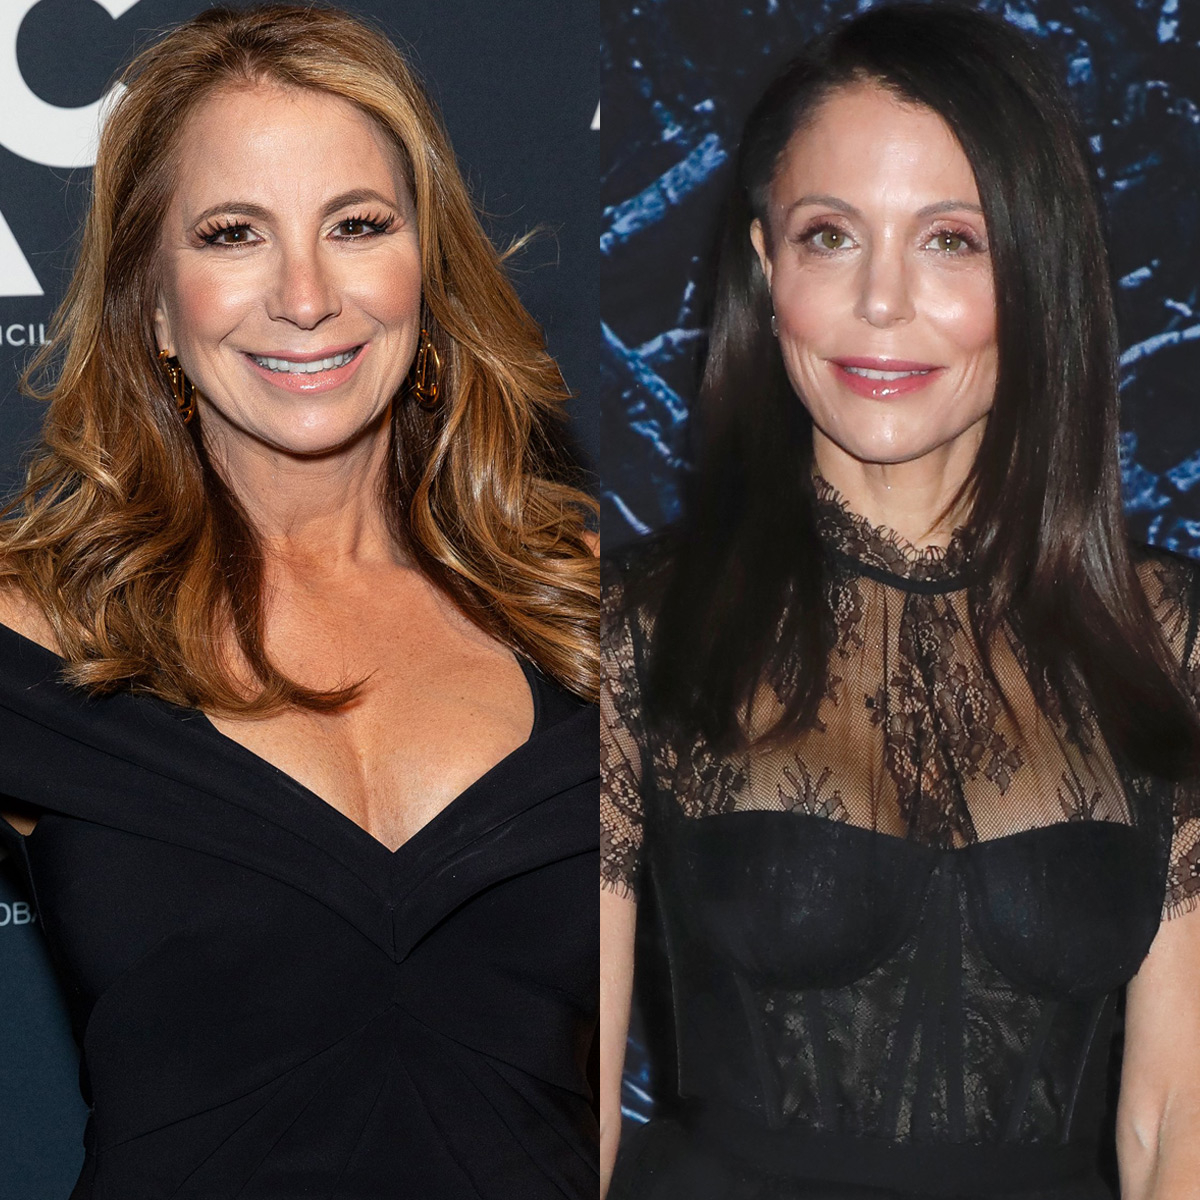 Bethenny Frankel & Jill Zarin Have Epic Reunion 13 Years After Feud